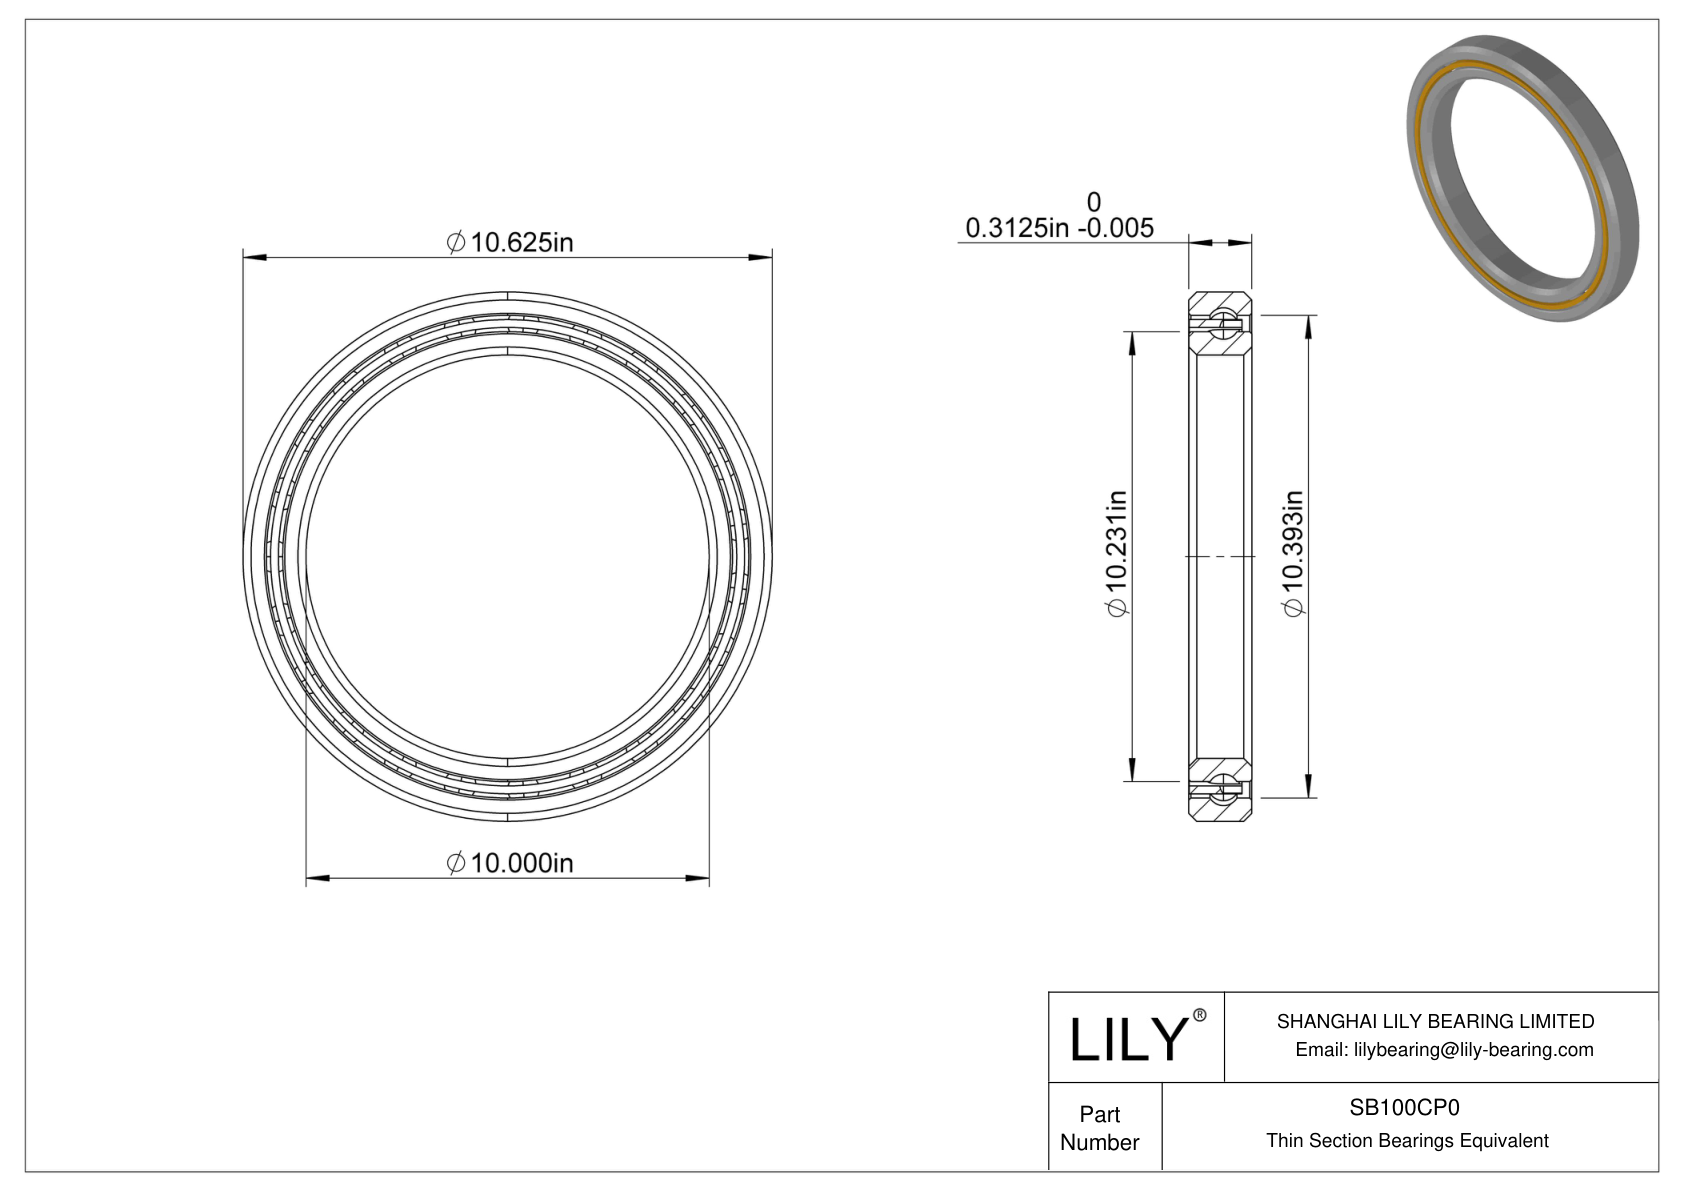 SB100CP0 Constant Section (CS) Bearings cad drawing